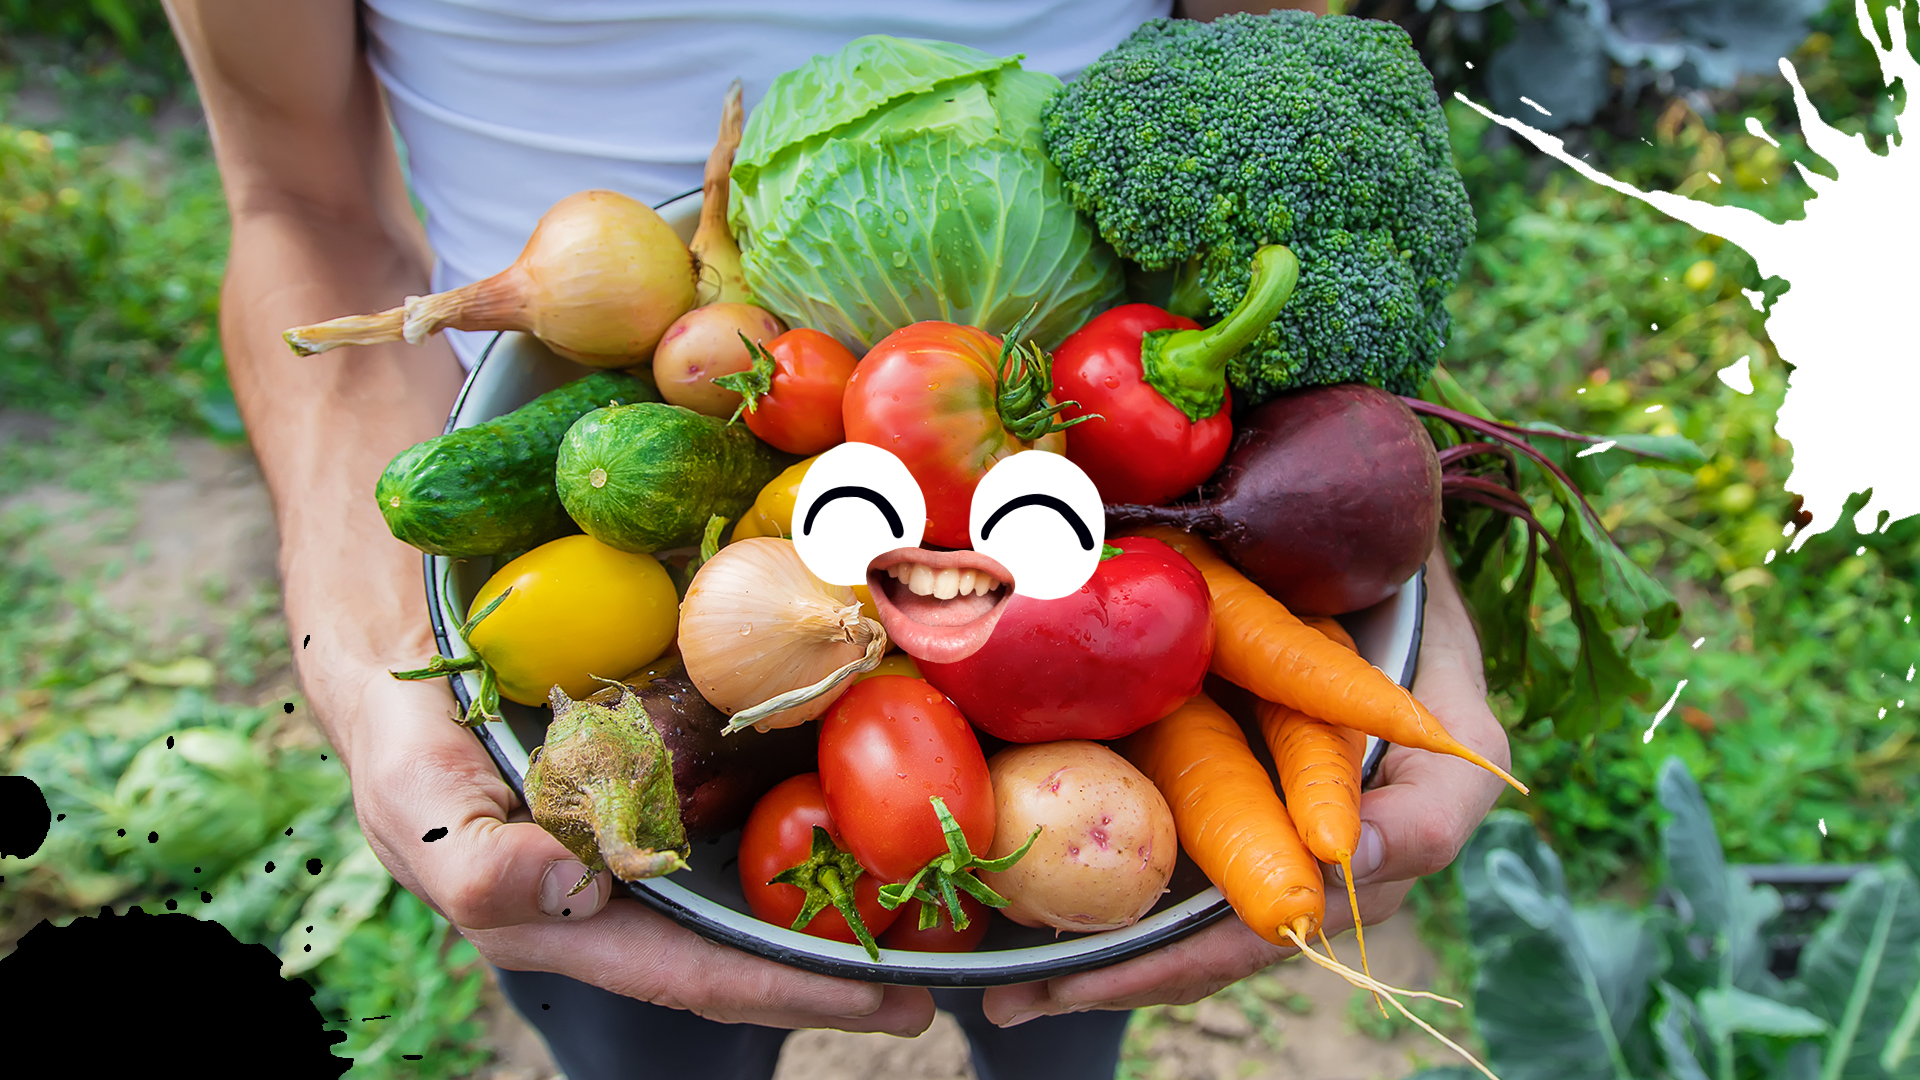 A basket of delicious vegetables